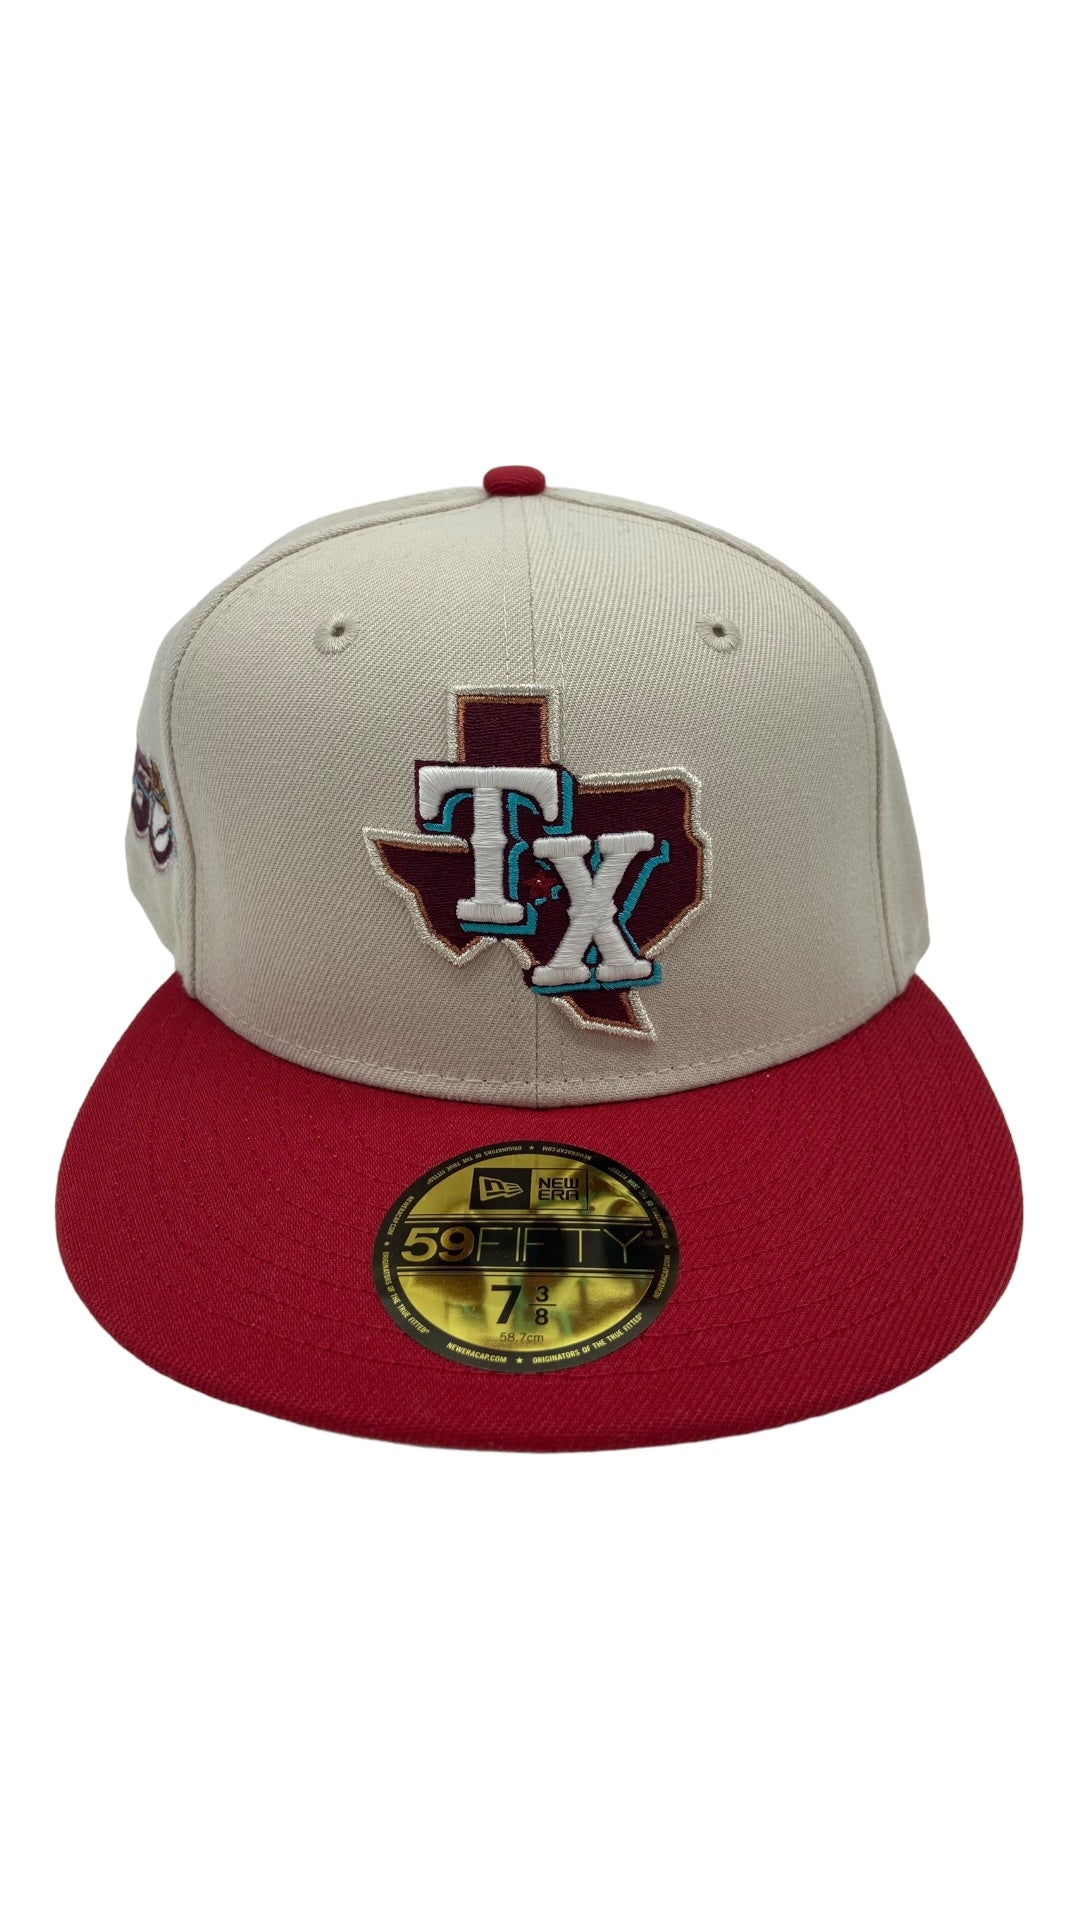 Texas Rangers 50th Cream/Red Fitted Hat